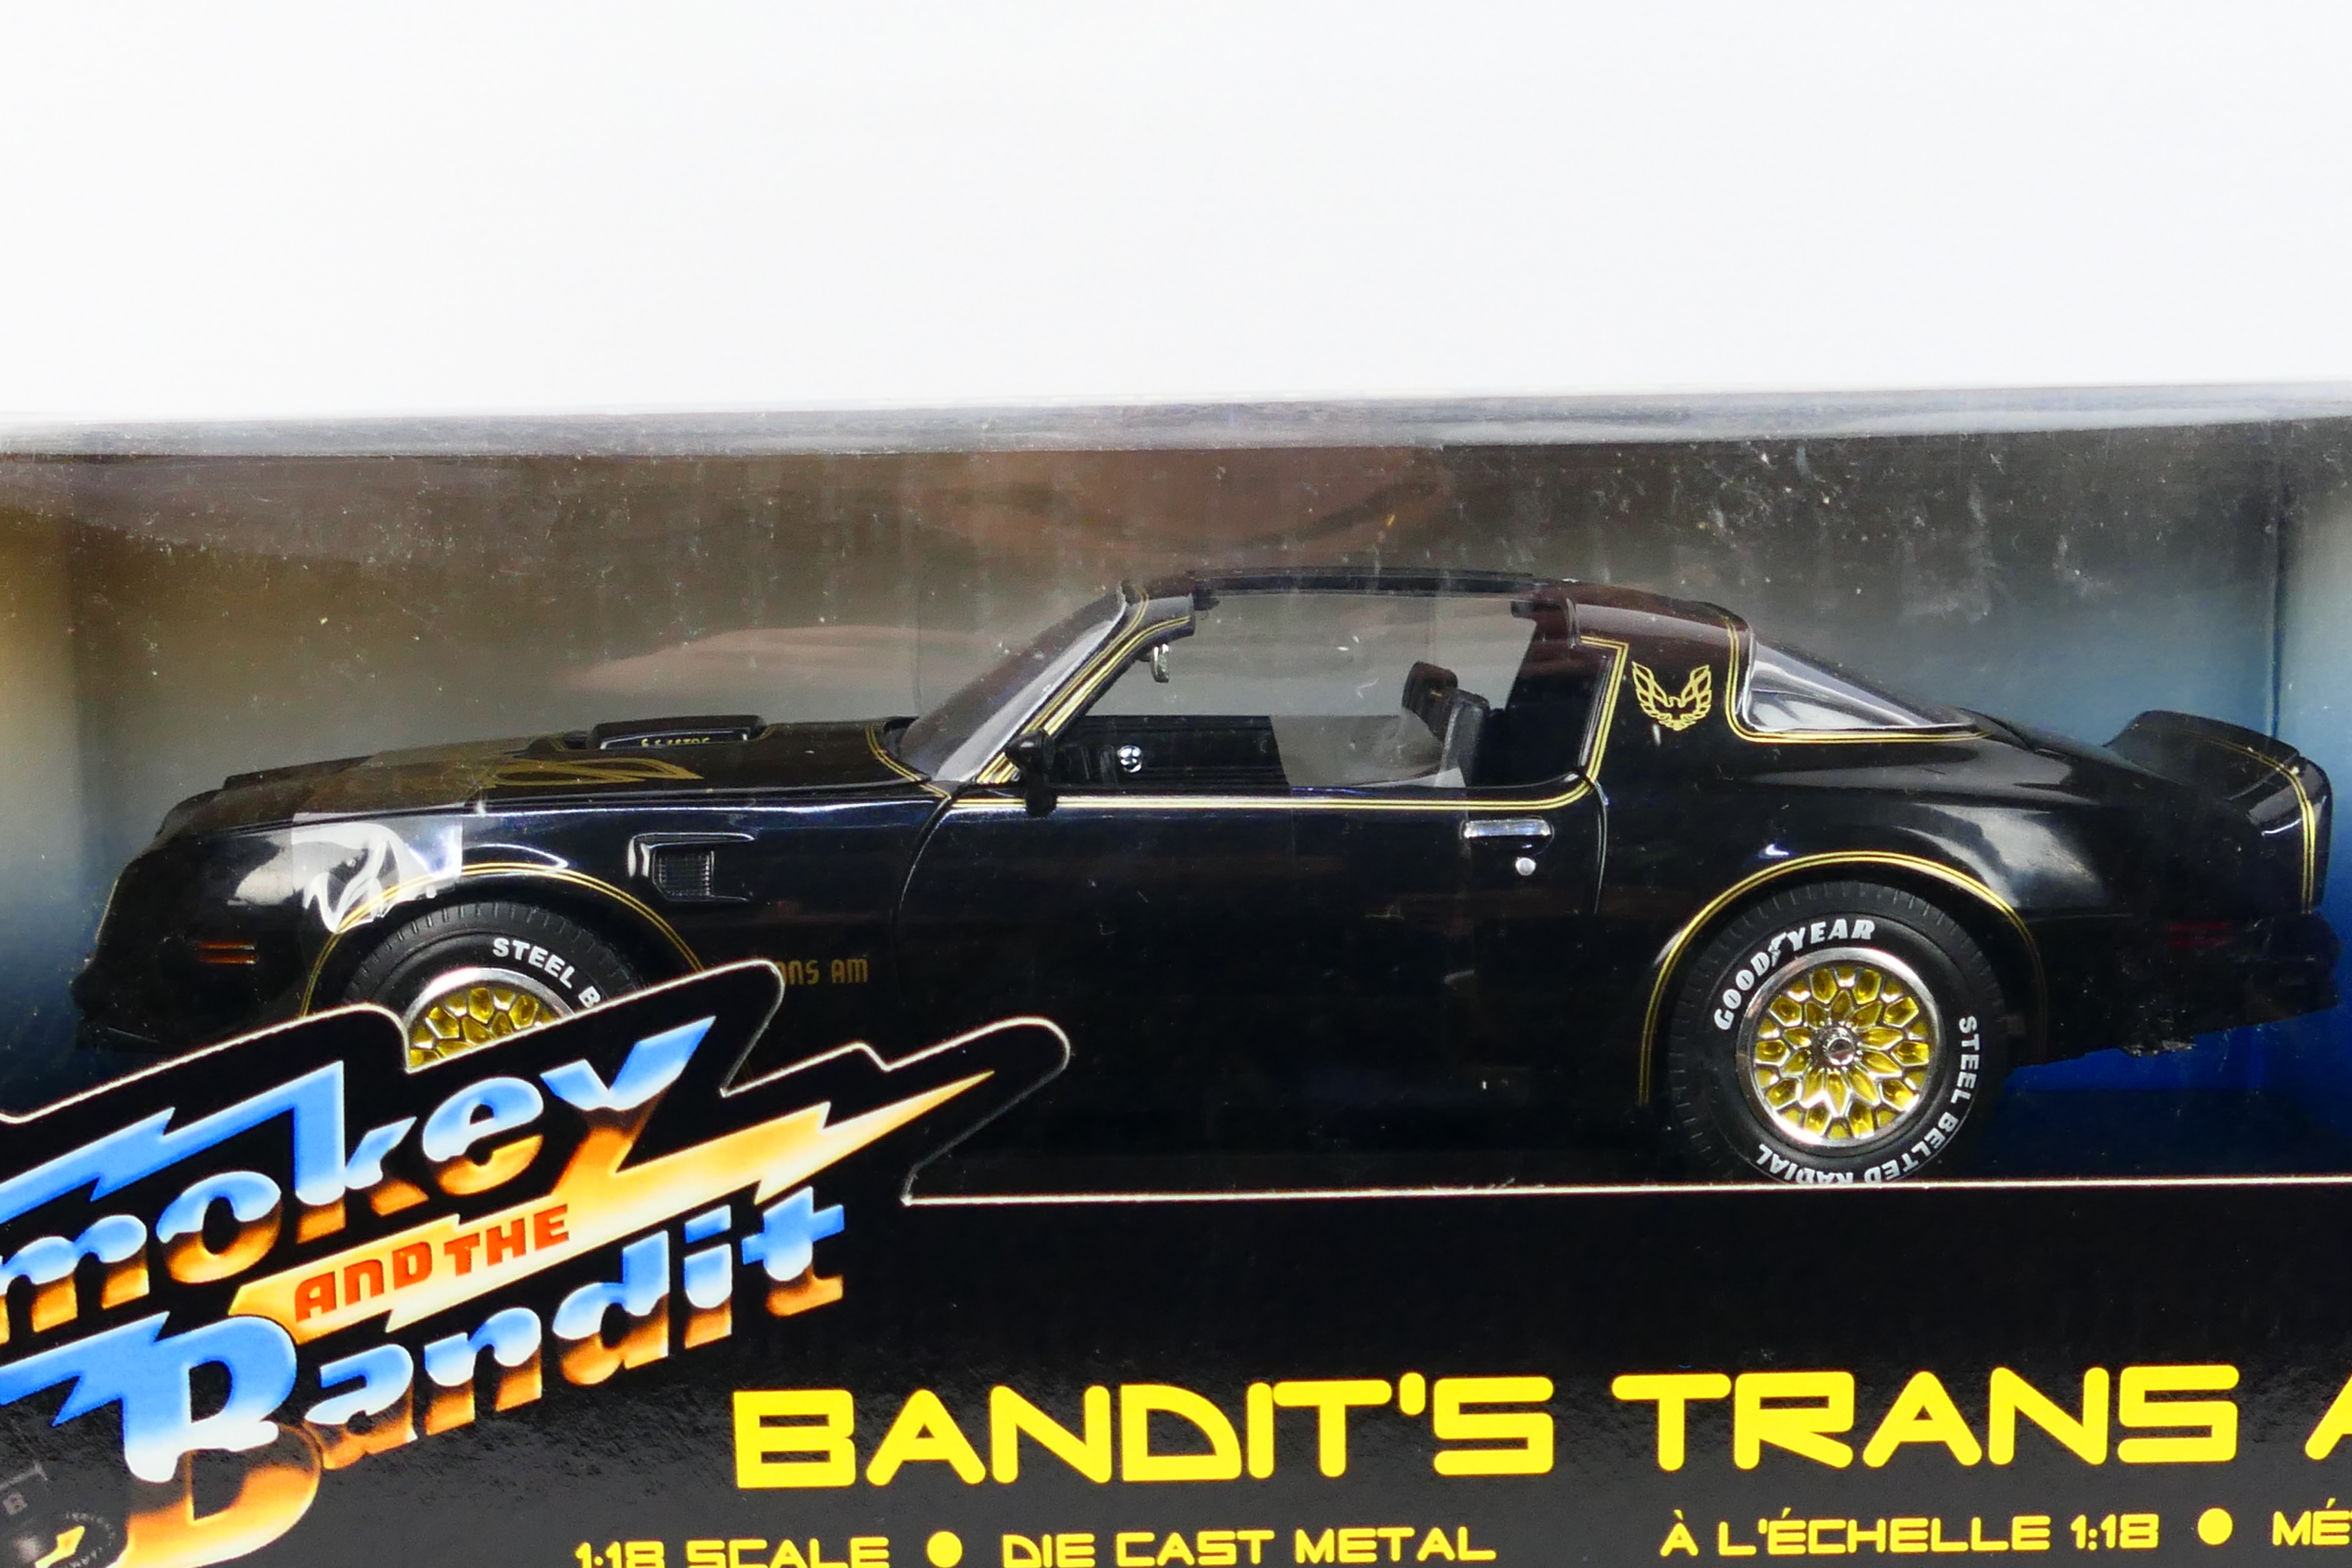 Ertl - A boxed 1:18 scale Ertl 'American Muscle' #33131 'Smokey and The Bandit' Bandit's Trans Am. - Image 2 of 5